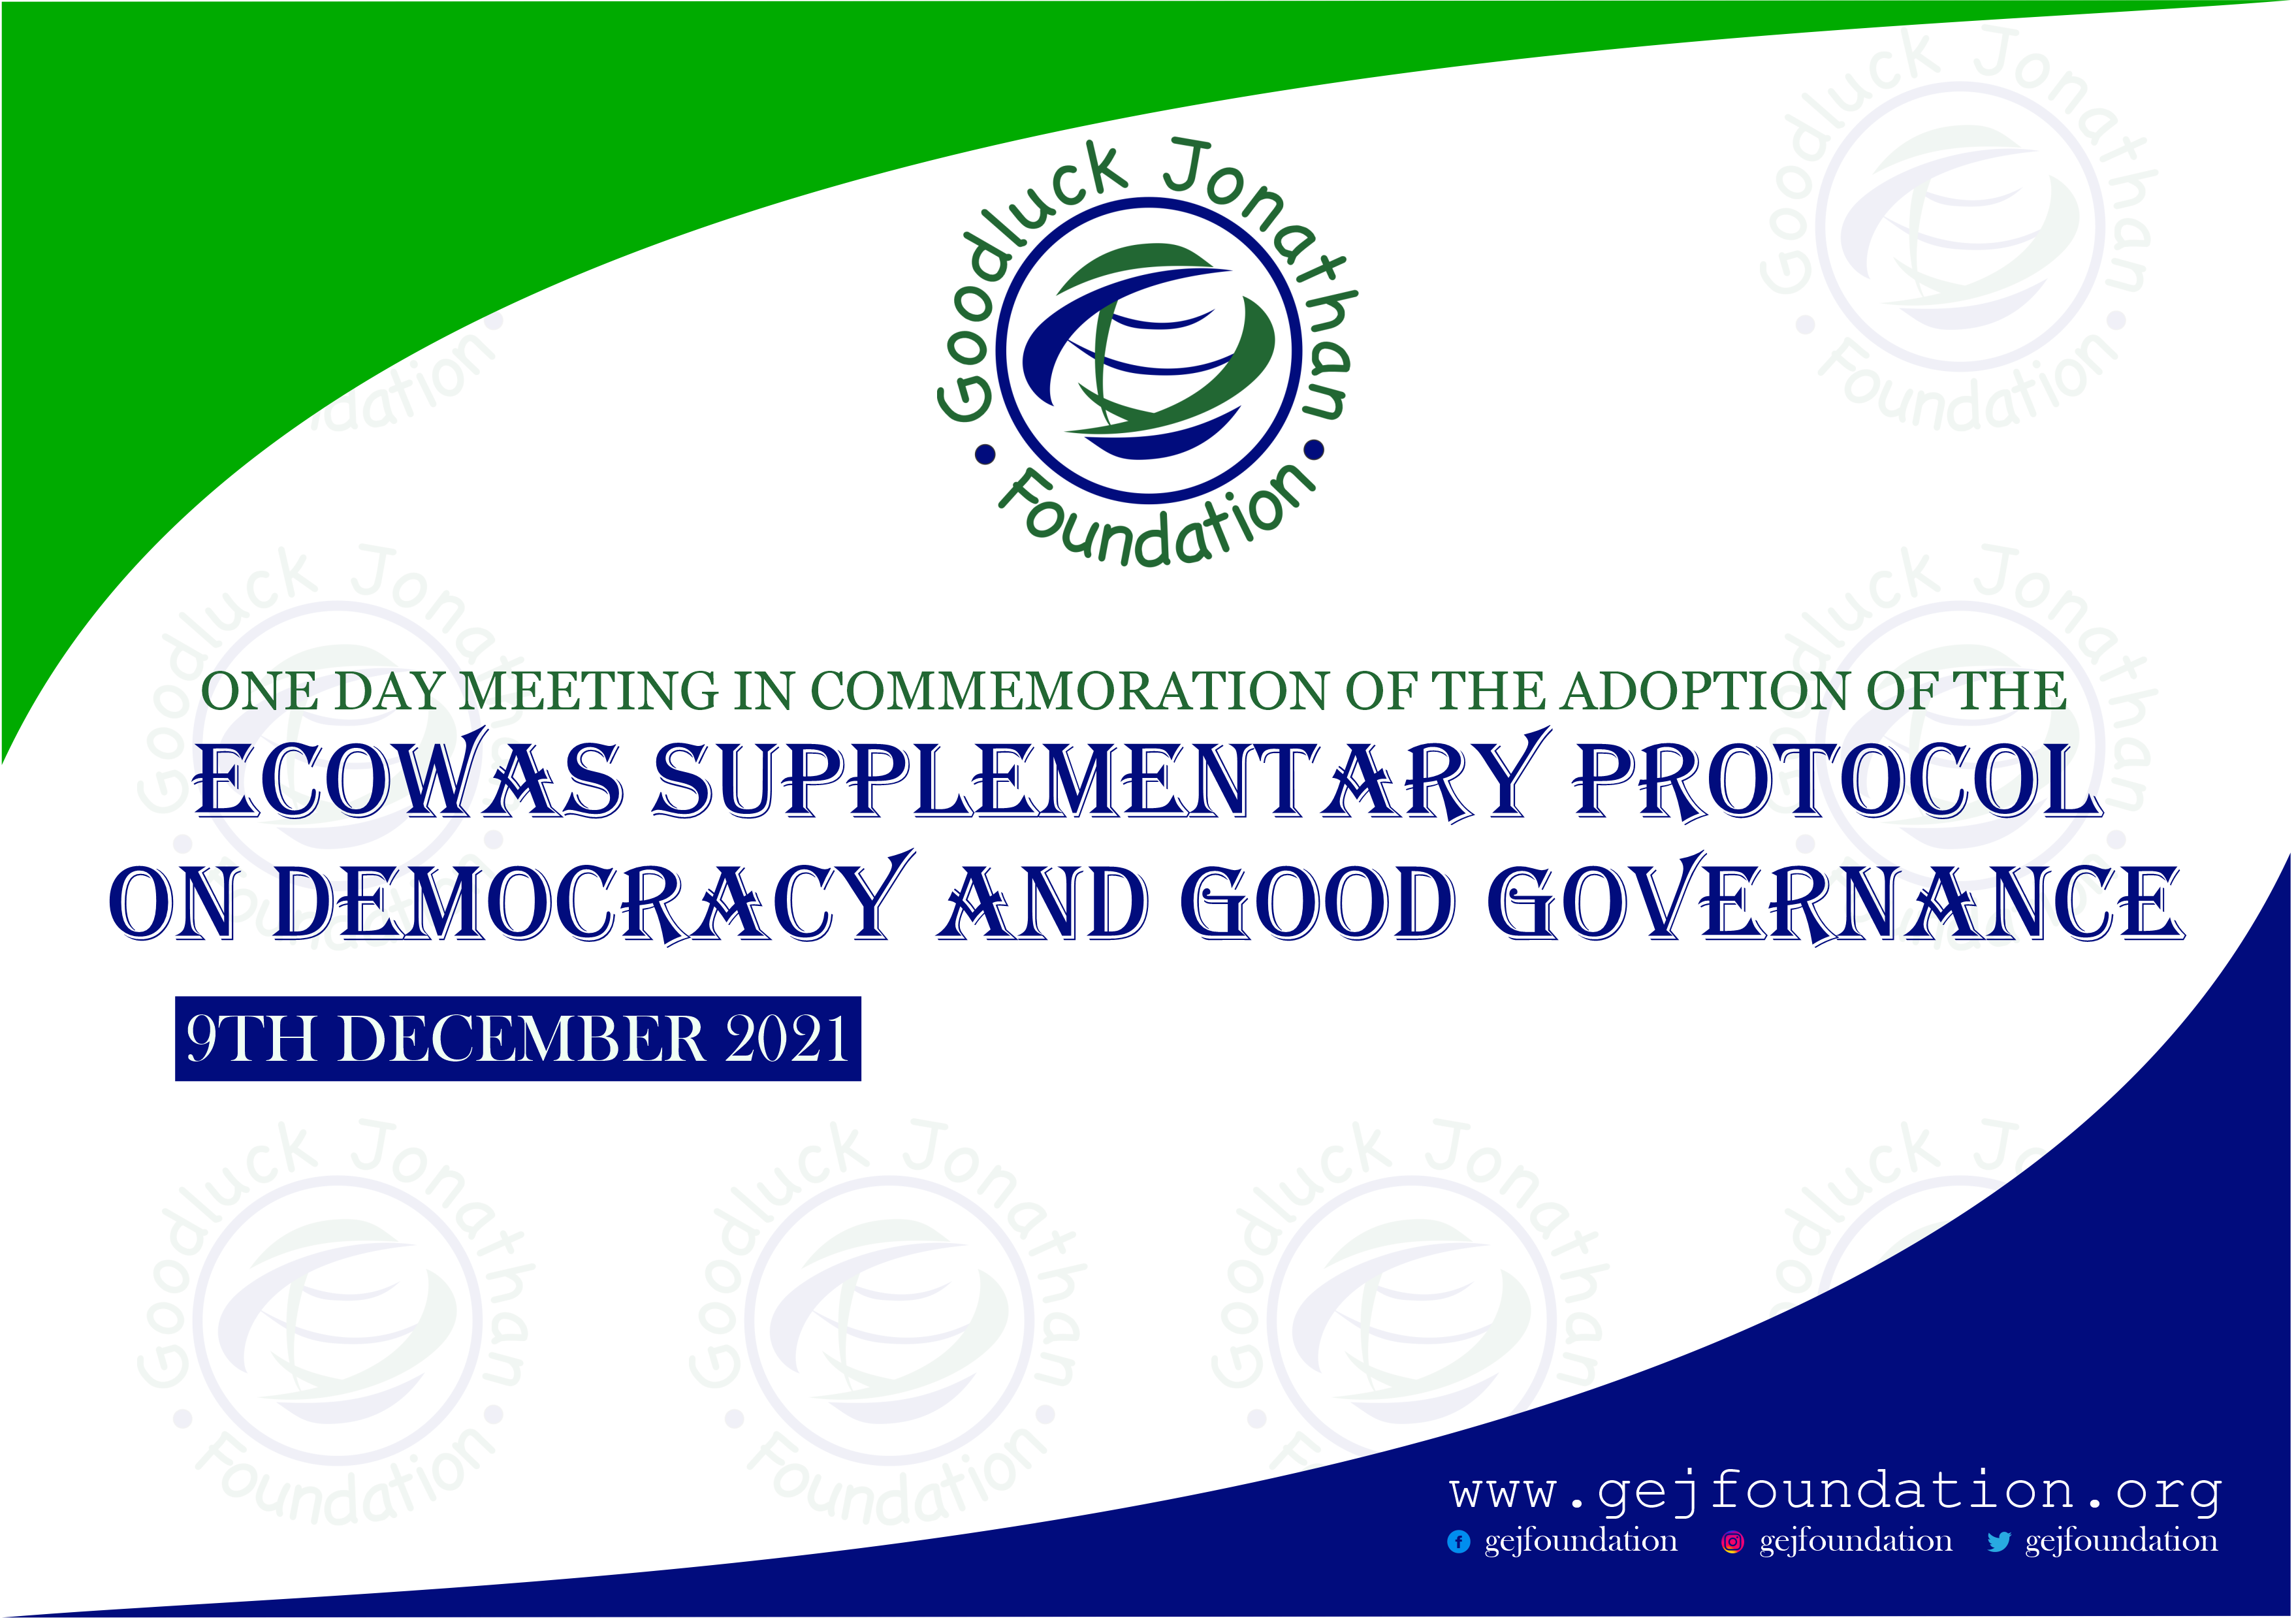 One Day Consultative Meeting In Commemoration of the ECOWAS Supplementary Protocol on Democracy and Good Governance